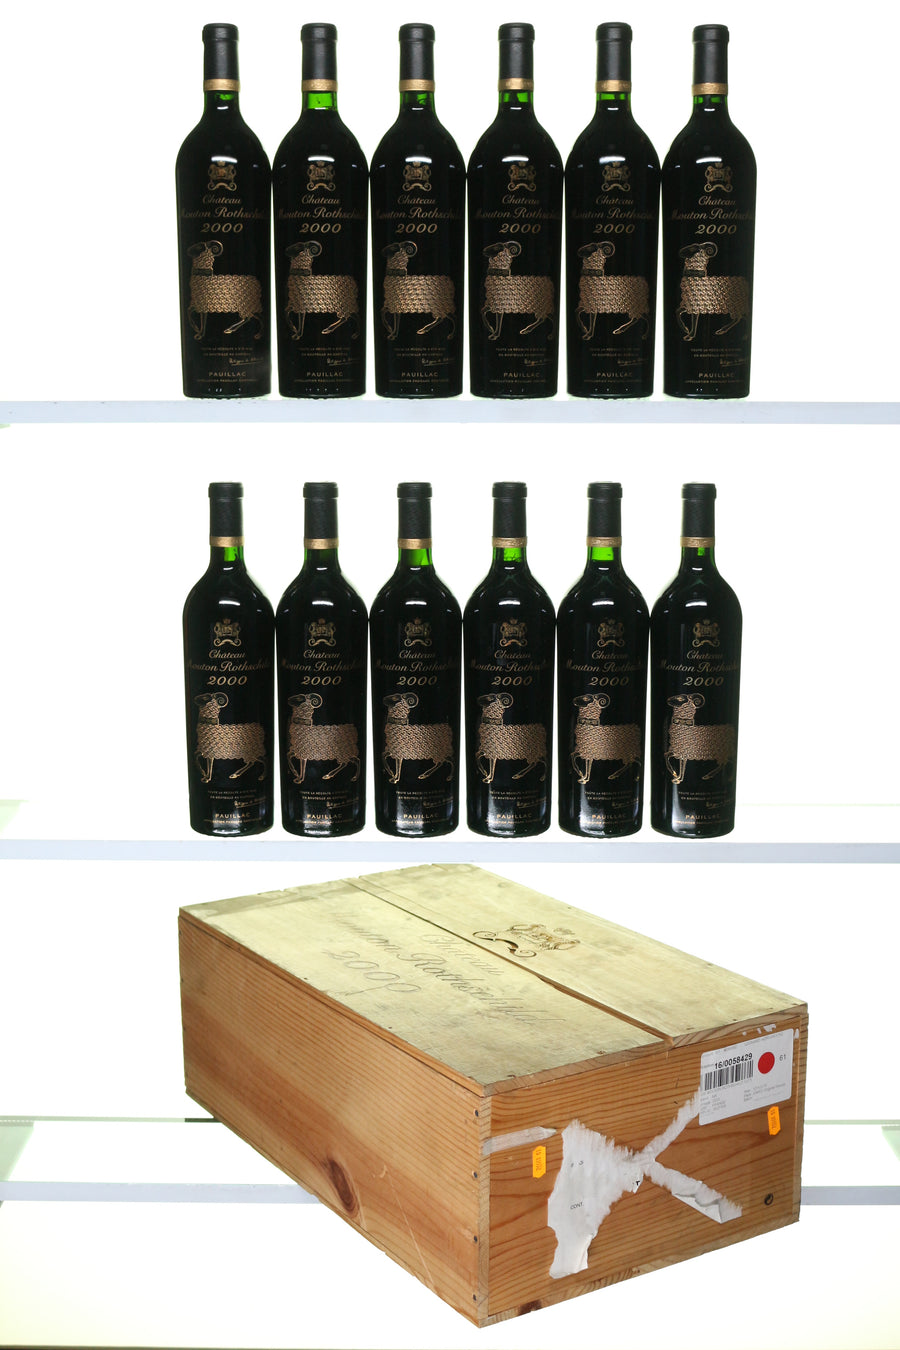 2000 Chateau Mouton Rothschild 12/75cl in bond owc